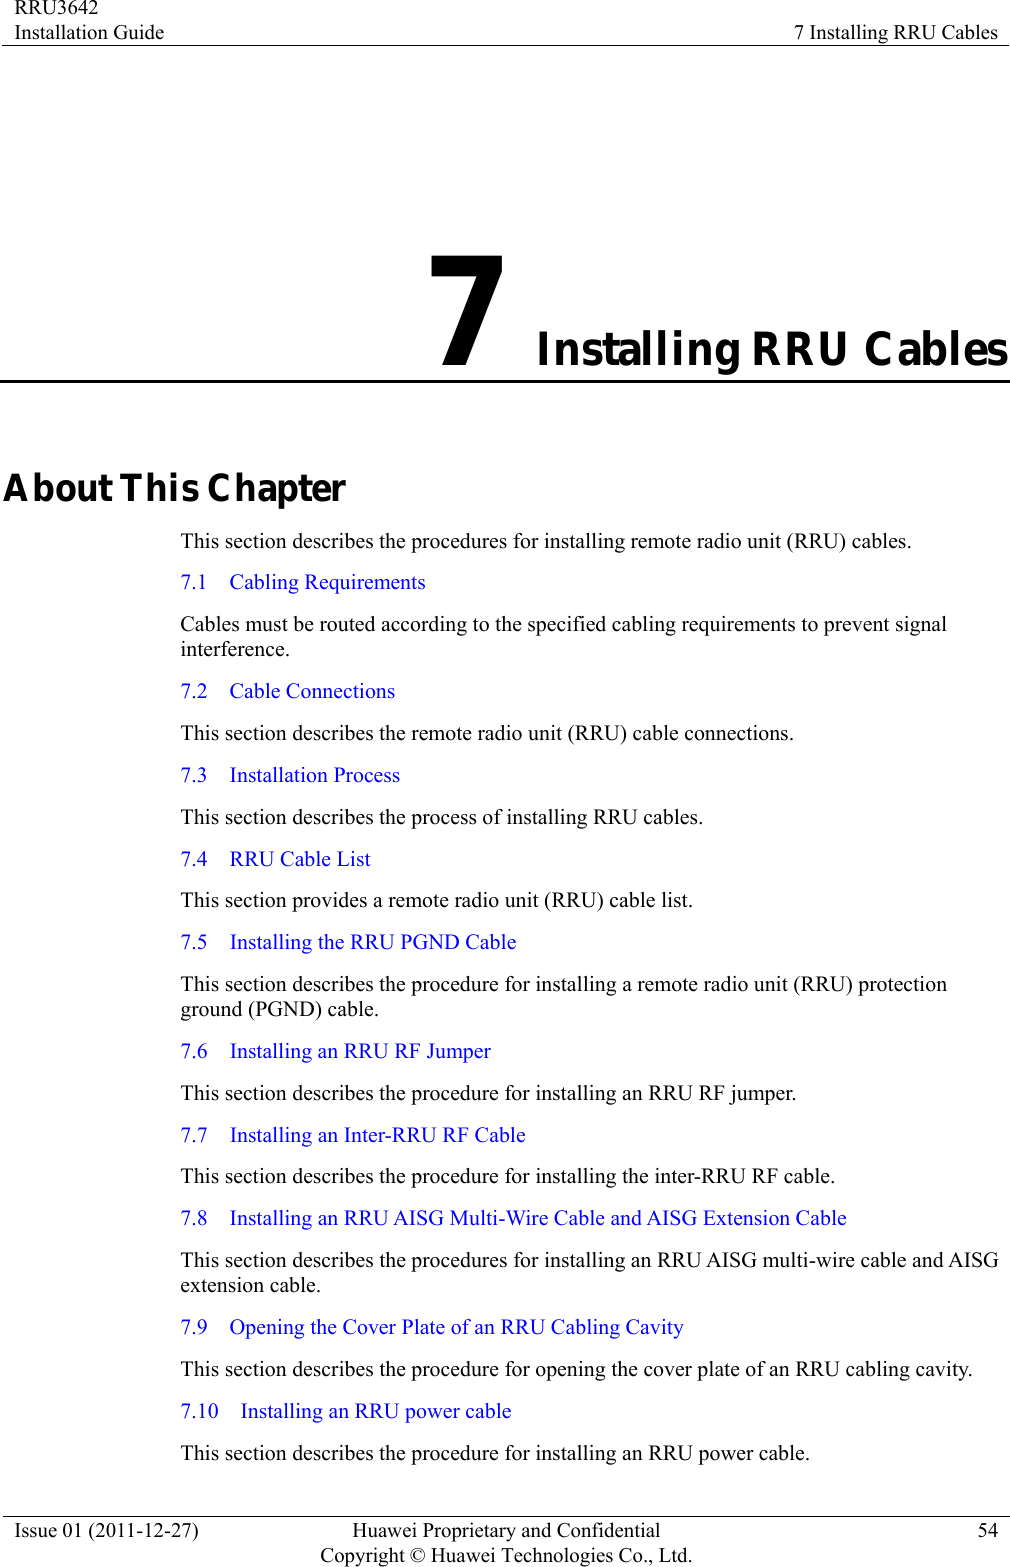 RRU3642 Installation Guide  7 Installing RRU Cables Issue 01 (2011-12-27)  Huawei Proprietary and Confidential         Copyright © Huawei Technologies Co., Ltd.54 7 Installing RRU Cables About This Chapter This section describes the procedures for installing remote radio unit (RRU) cables.   7.1  Cabling Requirements Cables must be routed according to the specified cabling requirements to prevent signal interference. 7.2  Cable Connections This section describes the remote radio unit (RRU) cable connections.   7.3  Installation Process This section describes the process of installing RRU cables. 7.4  RRU Cable List This section provides a remote radio unit (RRU) cable list. 7.5    Installing the RRU PGND Cable This section describes the procedure for installing a remote radio unit (RRU) protection ground (PGND) cable.   7.6    Installing an RRU RF Jumper This section describes the procedure for installing an RRU RF jumper. 7.7    Installing an Inter-RRU RF Cable This section describes the procedure for installing the inter-RRU RF cable. 7.8    Installing an RRU AISG Multi-Wire Cable and AISG Extension Cable This section describes the procedures for installing an RRU AISG multi-wire cable and AISG extension cable. 7.9    Opening the Cover Plate of an RRU Cabling Cavity This section describes the procedure for opening the cover plate of an RRU cabling cavity. 7.10    Installing an RRU power cable This section describes the procedure for installing an RRU power cable. 